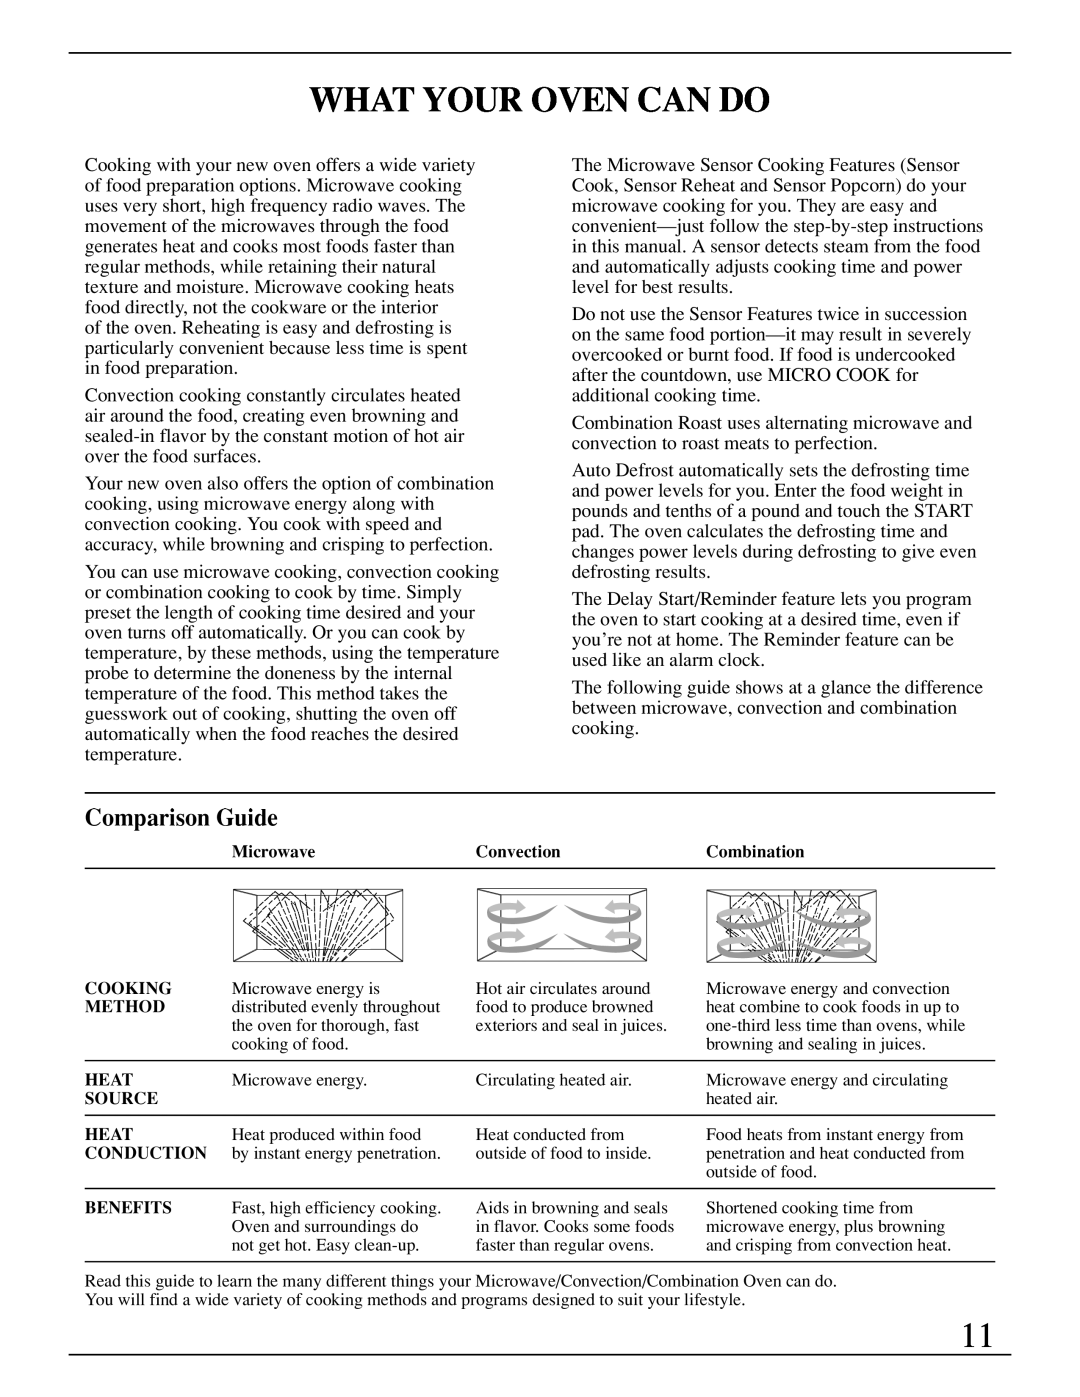 GE Monogram ZMC1095 owner manual What Your Oven Can Do, Comparison Guide 